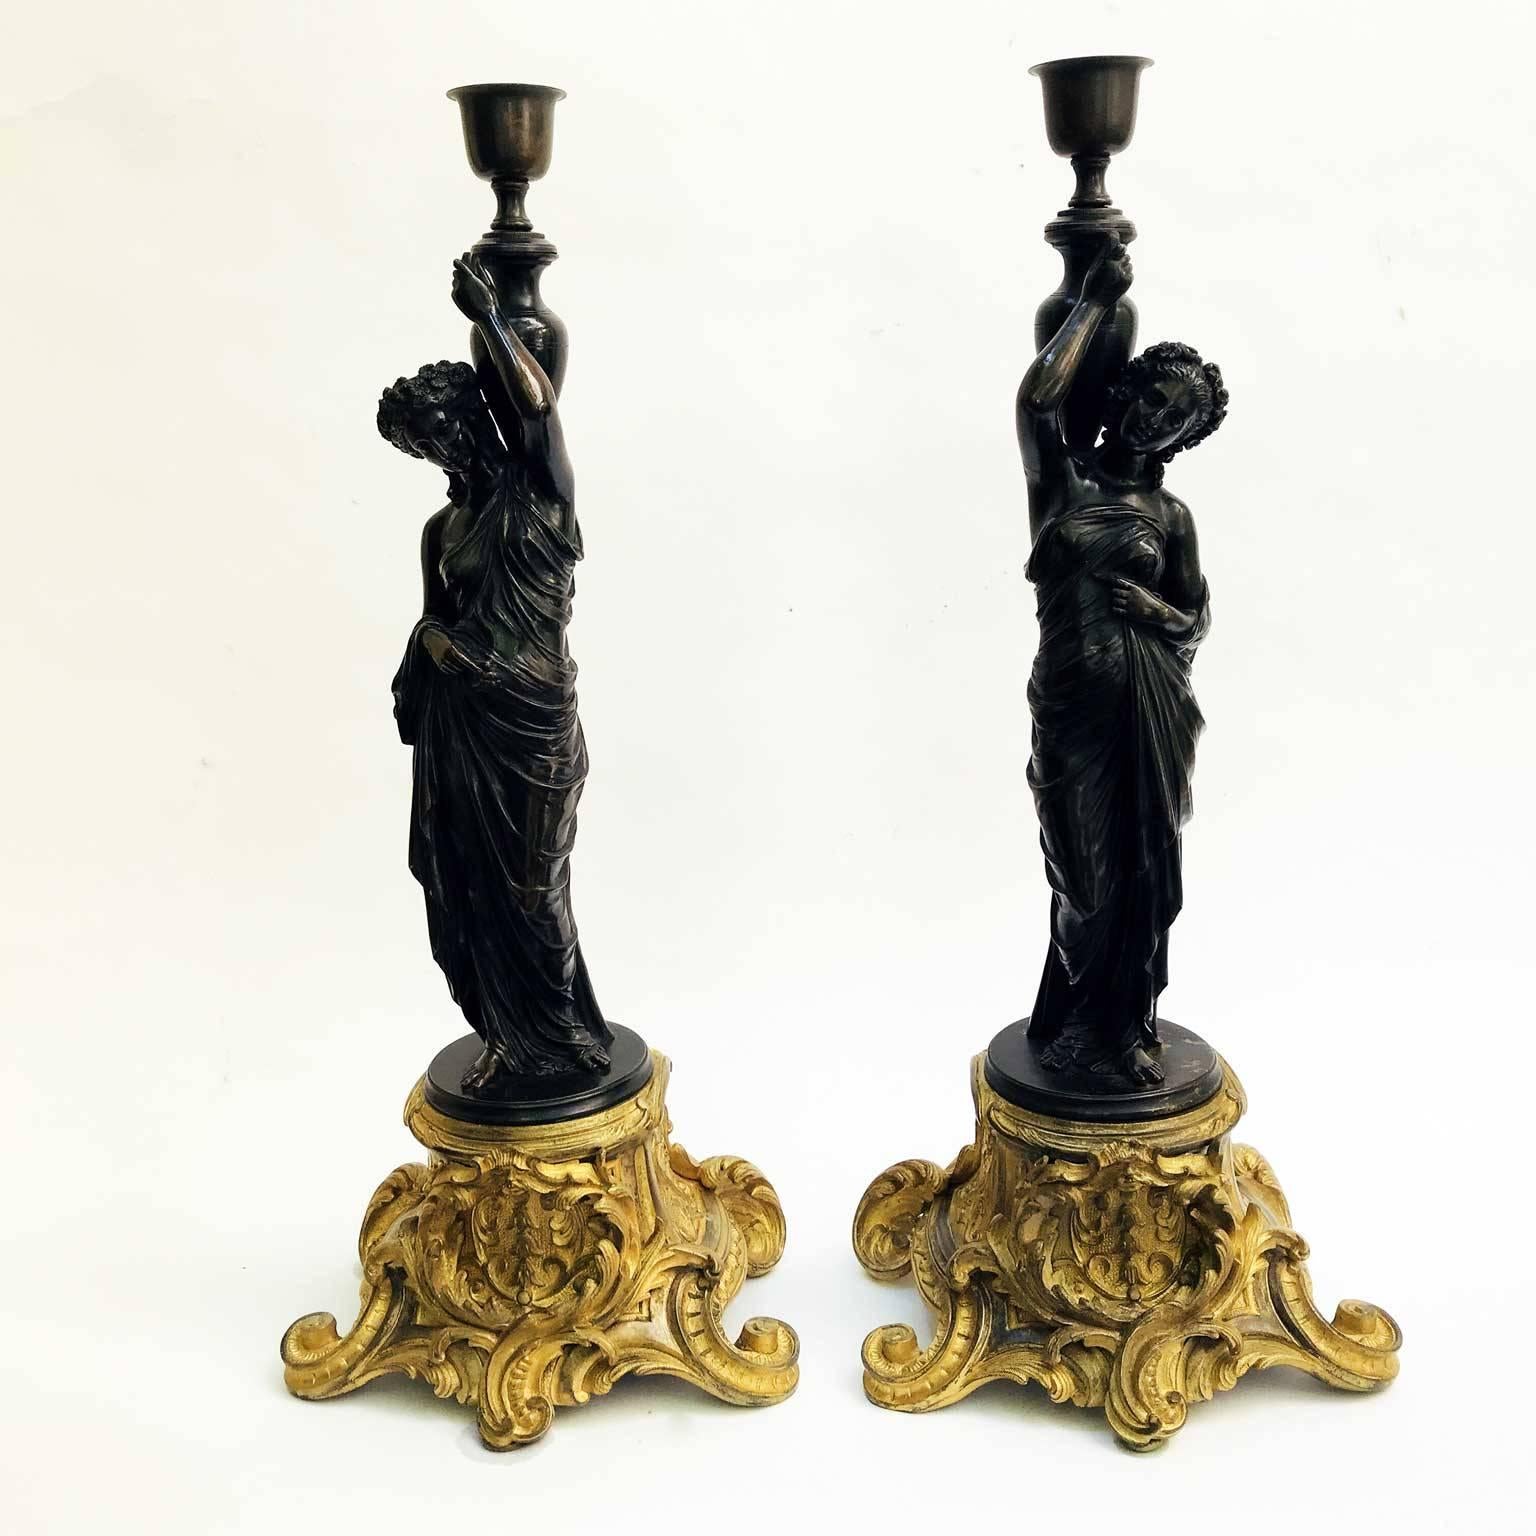 Gilt Pair of Late 19th Century French Metal Figural Table Lamps Neoclassical Style